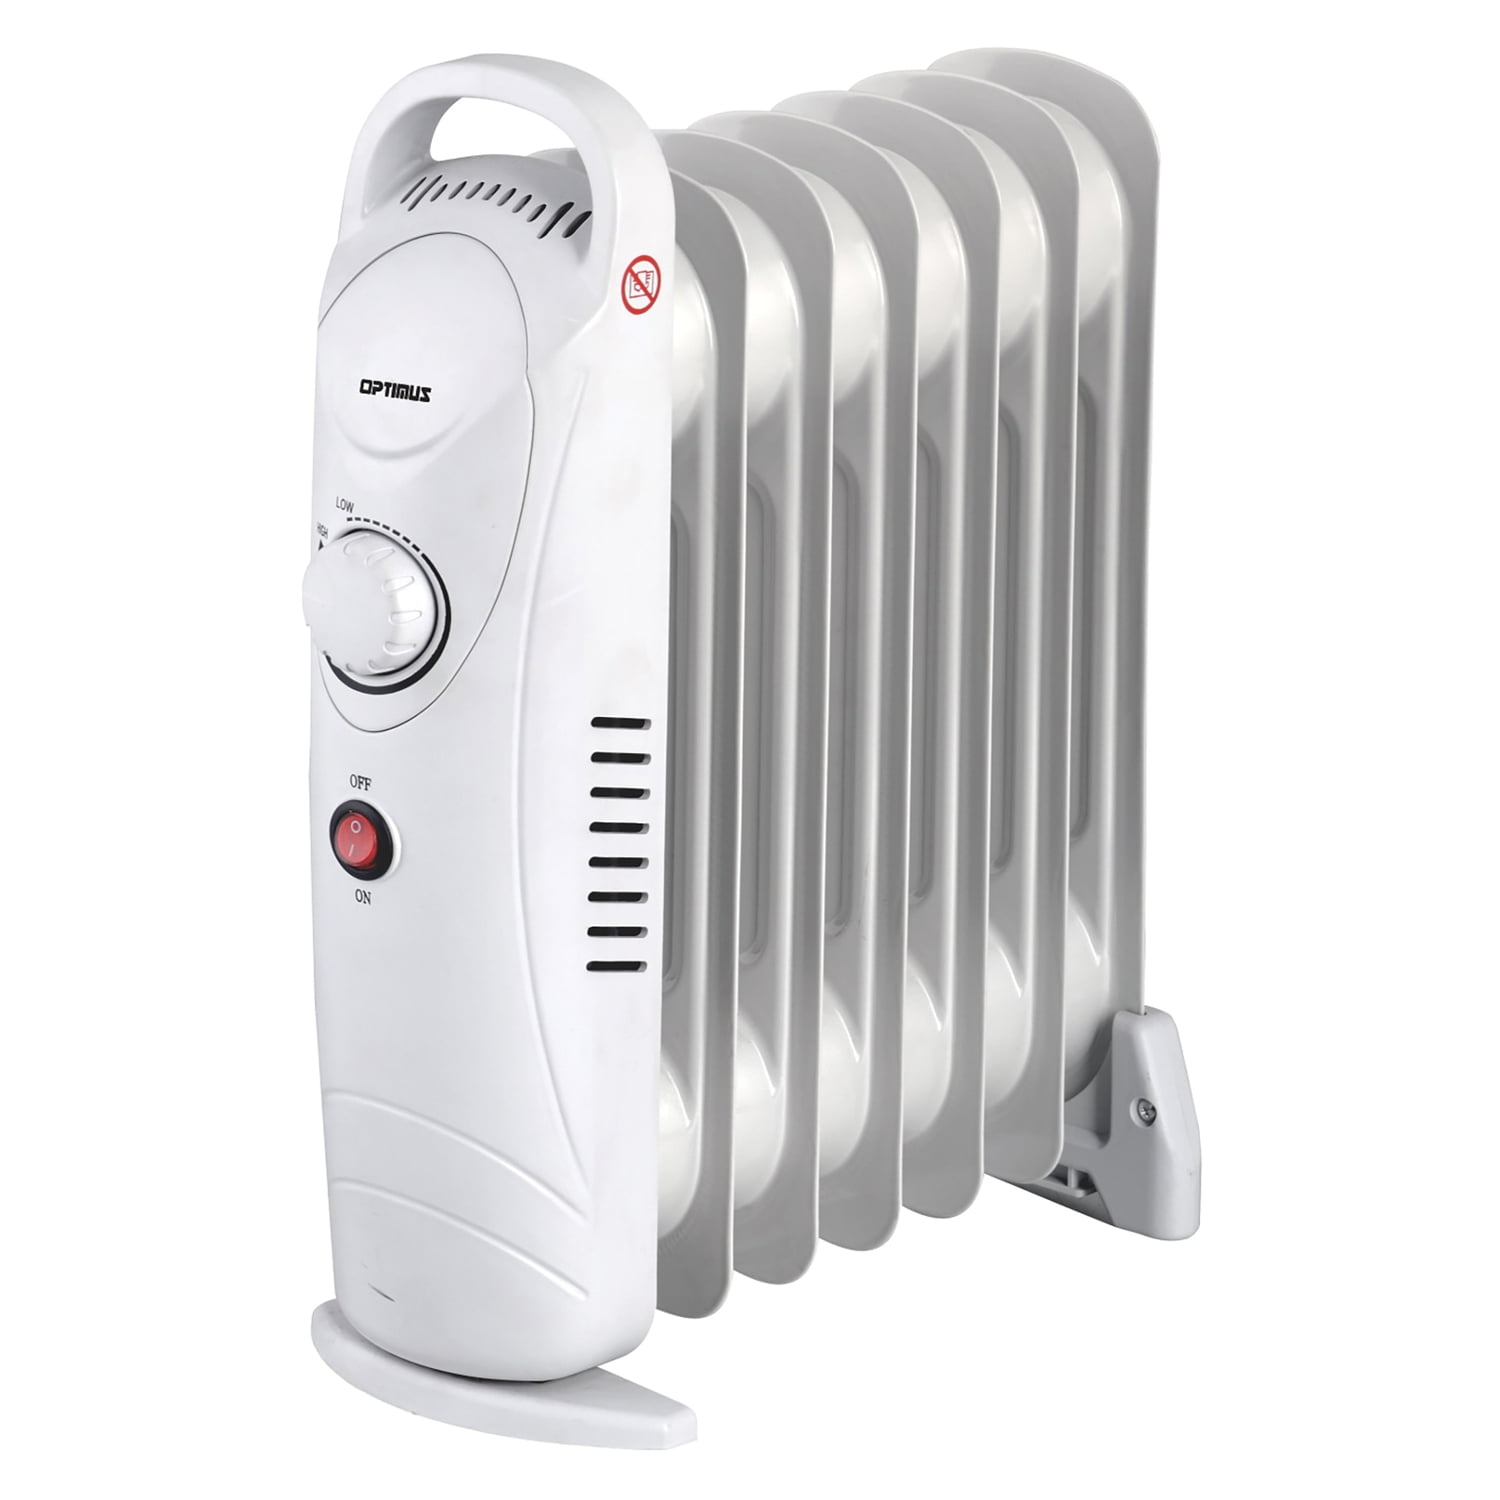 Optimus Mini Plug-in Heater with Thermostat